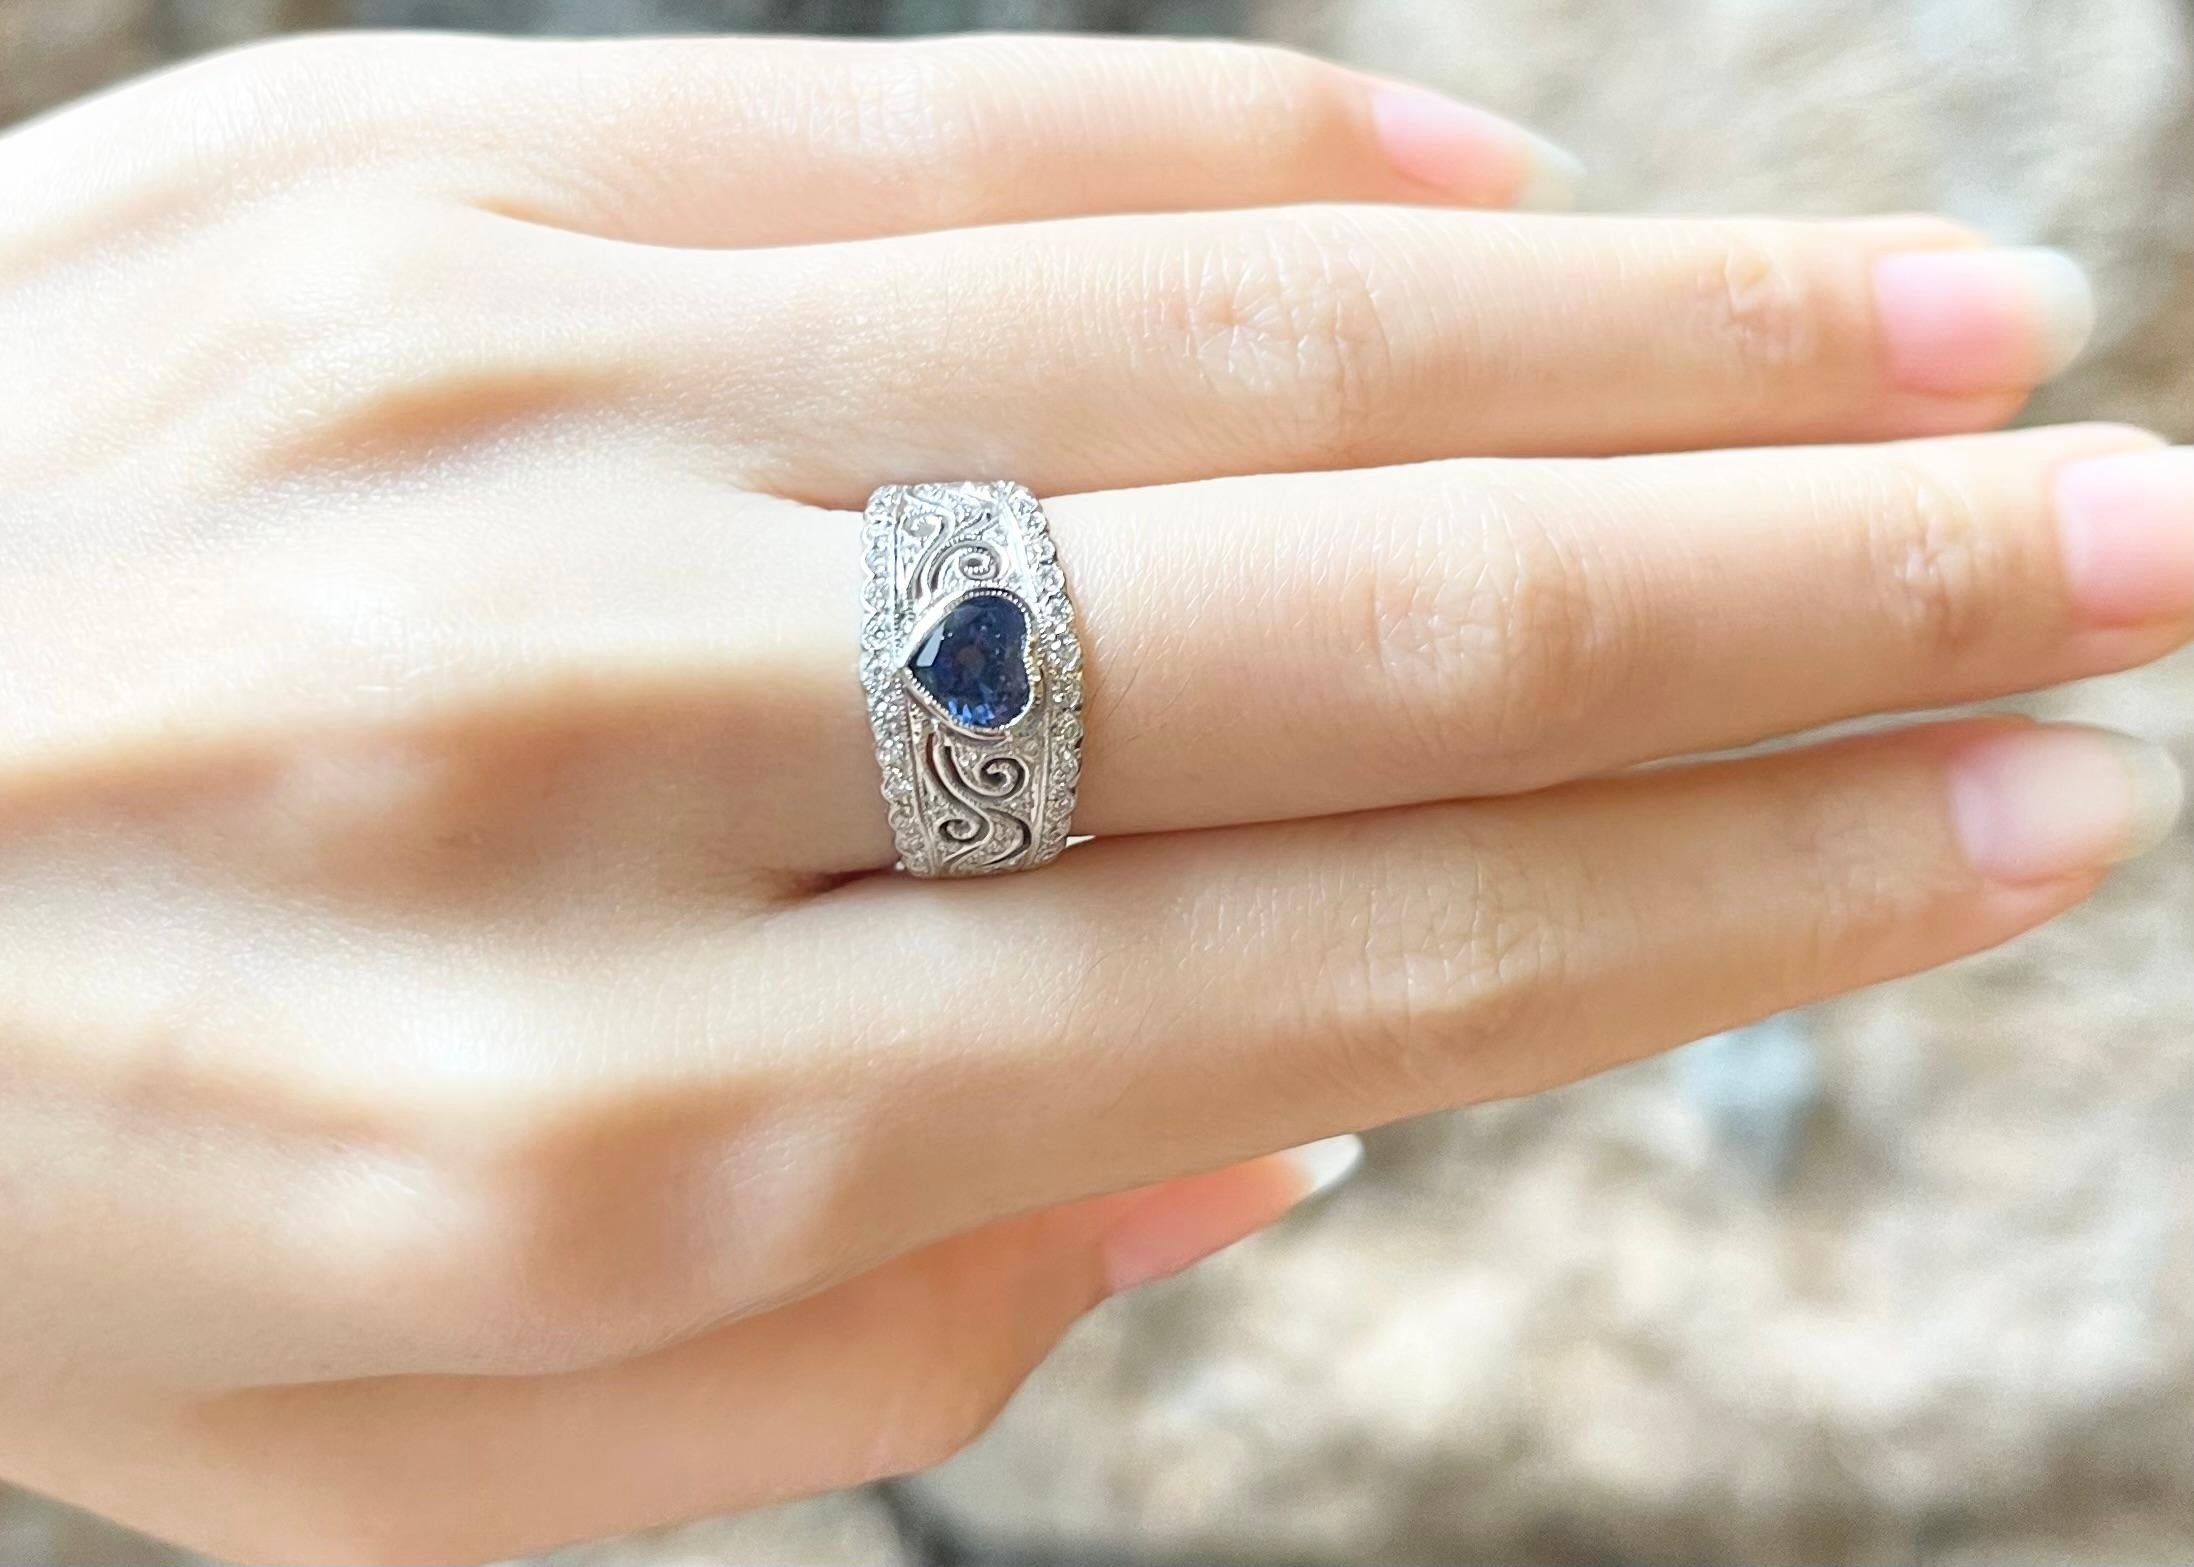 Blue Sapphire 1.09 carats with Diamond 0.33 carat Ring set in 18K White Gold Settings

Width:  1.9 cm 
Length: 1.0 cm
Ring Size: 51
Total Weight: 5.84 grams

